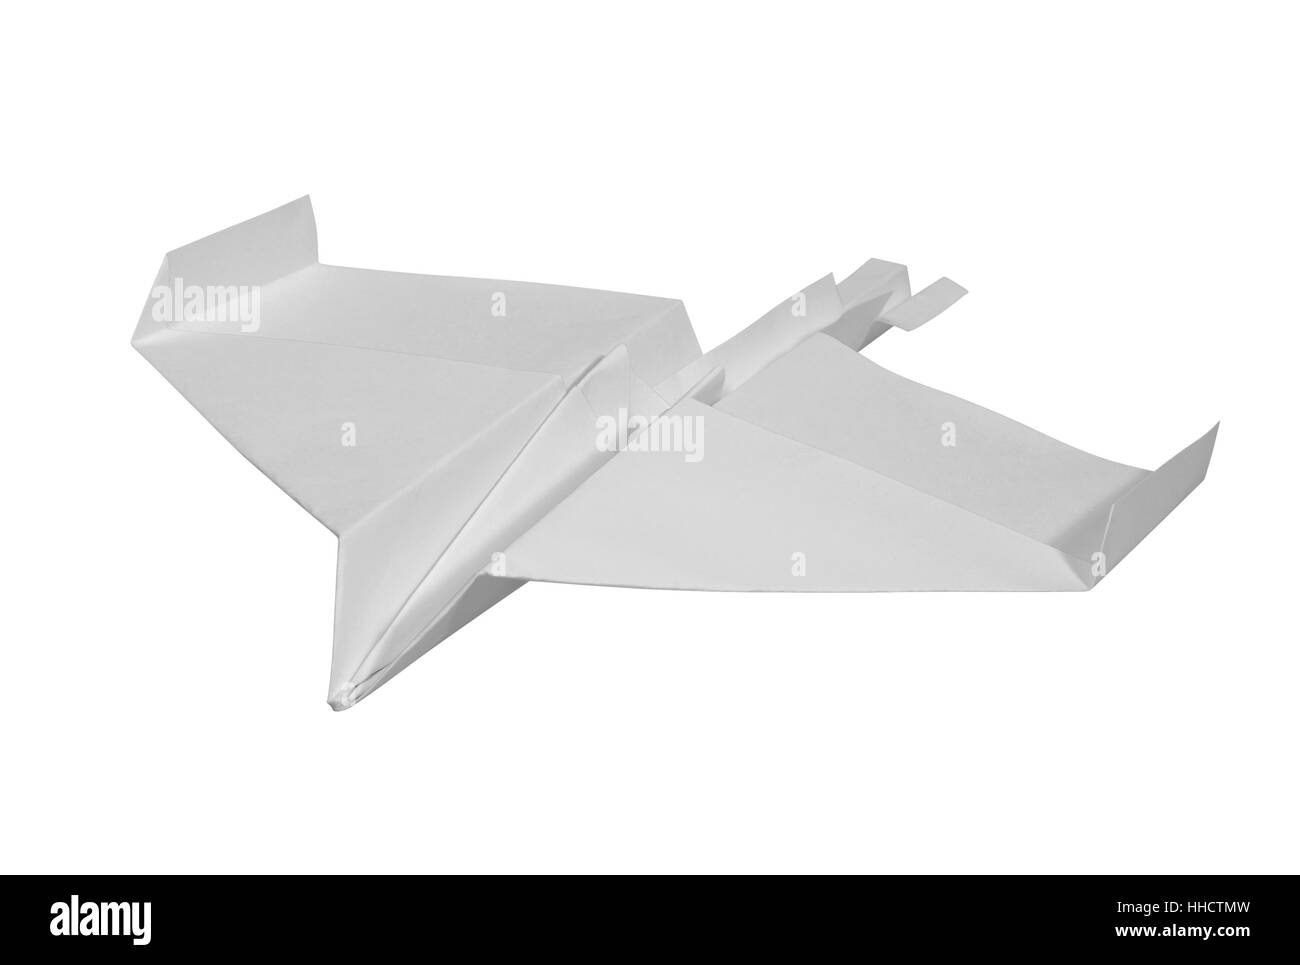 studio photography of a paper plane isolated on white with clipping path Stock Photo